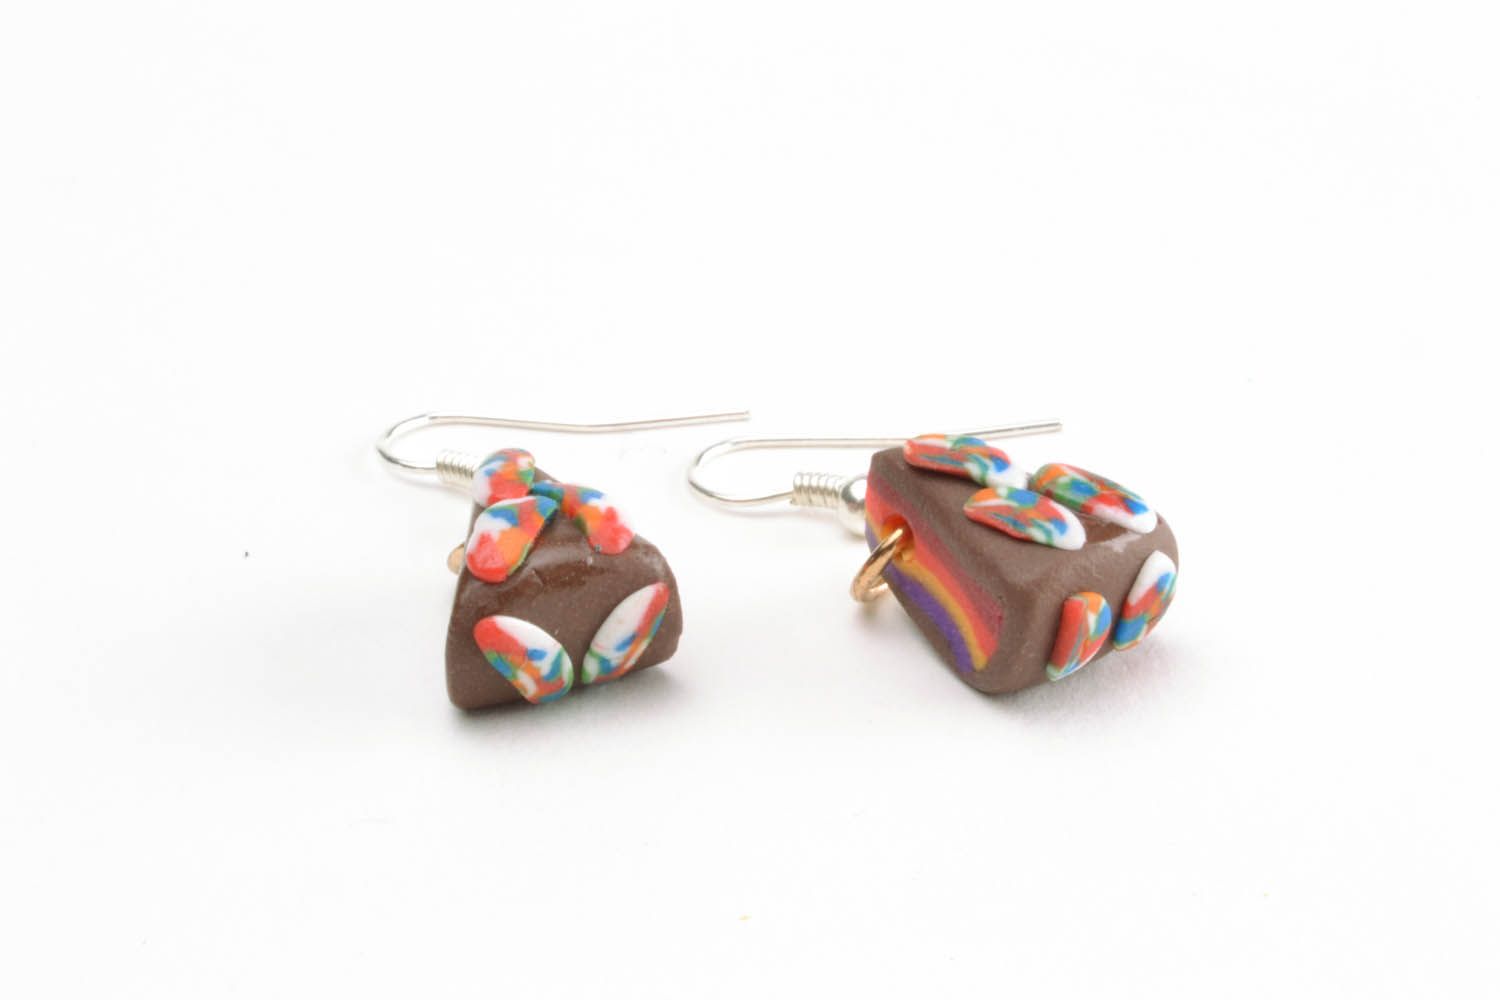 Cake-shaped earrings made of polymer clay photo 3